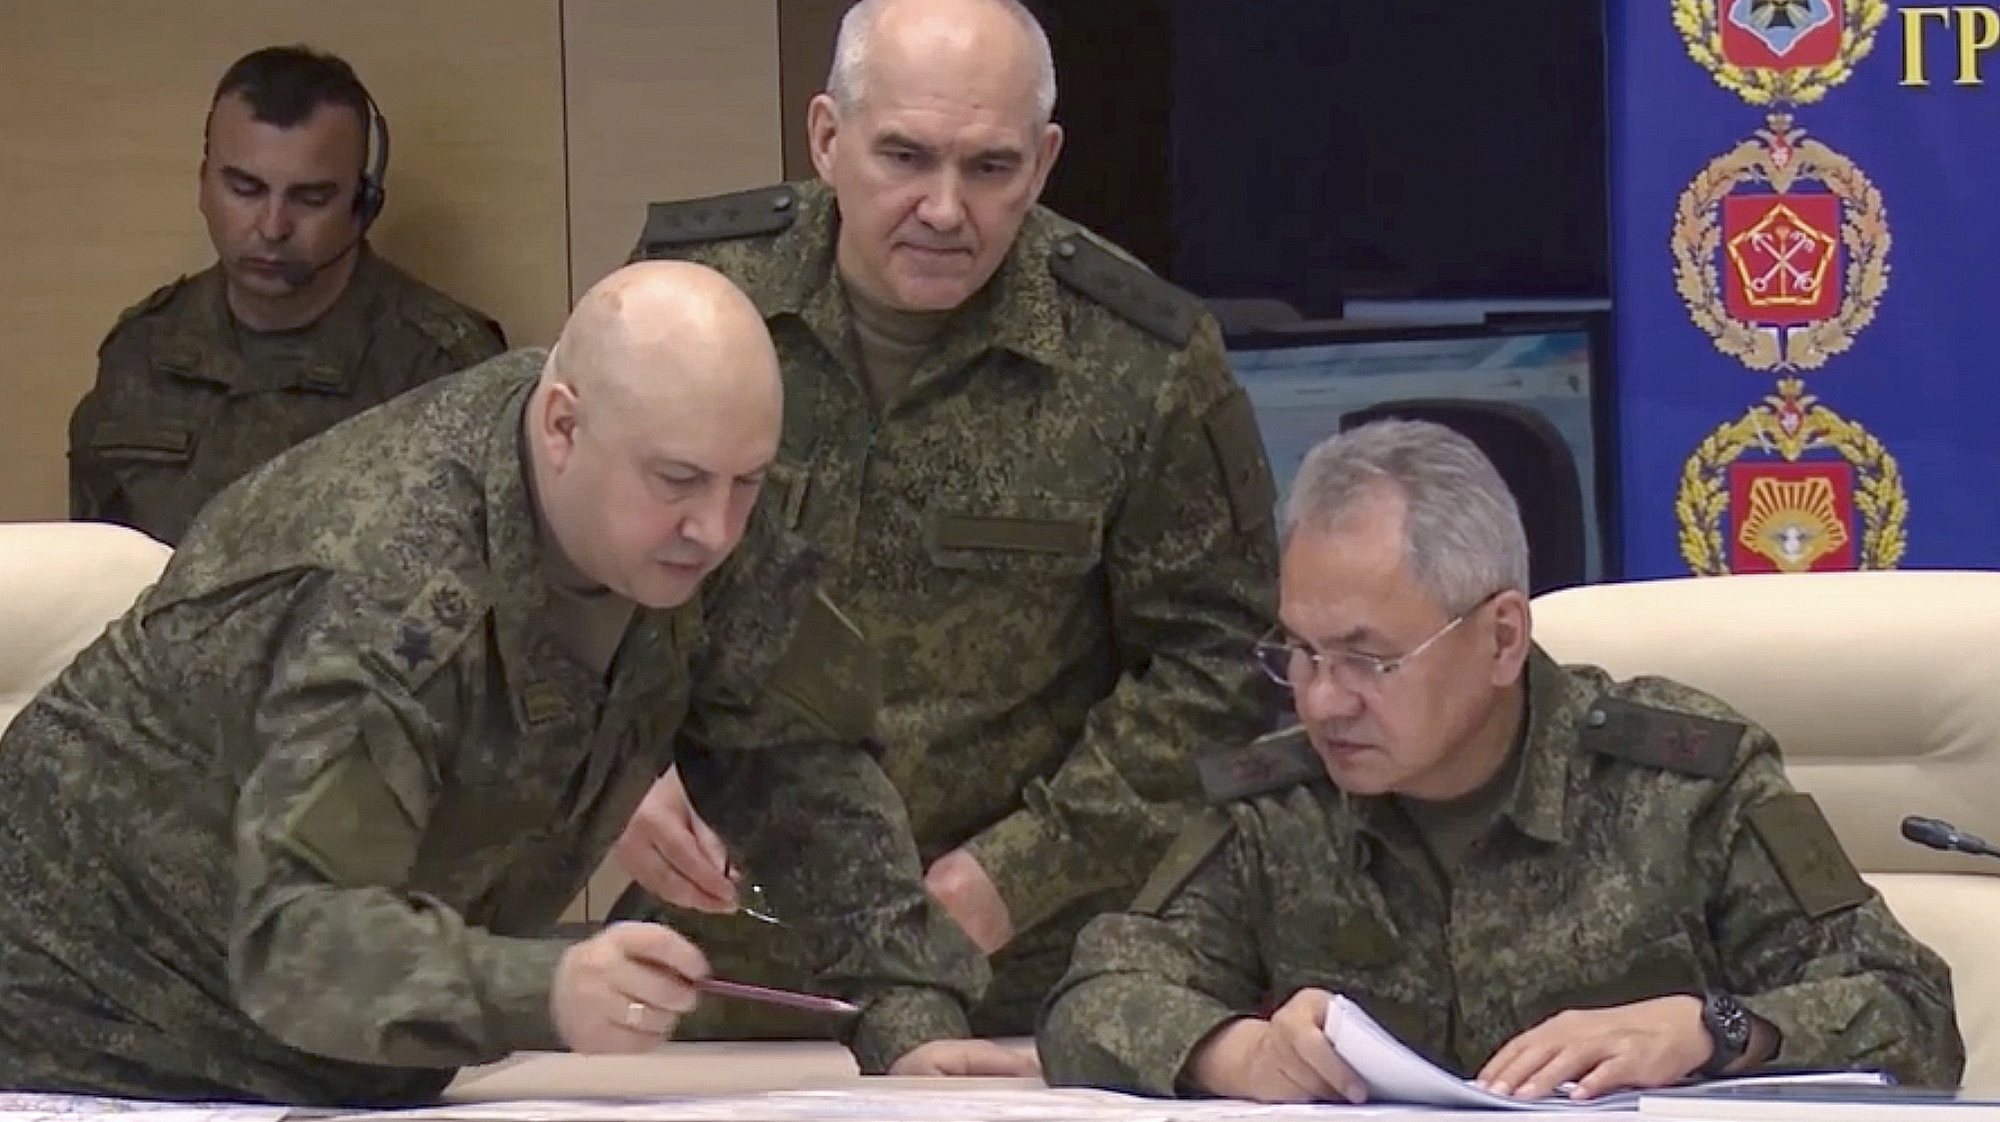 epa10294411 A still image taken from a handout video provided by the Russian Defence Ministry press service shows Russia&#039;s Defence Minister Sergei Shoigu (R) listening to Commander Sergei Surovikin (L) on his visit to the command centre of the Joint Russian Forces, at an undisclosed location in Ukraine, 08 November 2022. On 24 February 2022 Russian troops entered the Ukrainian territory in what the Russian president declared as a &#039;Special Military Operation&#039;, starting an armed conflict that has provoked destruction and a humanitarian crisis.  EPA/RUSSIAN DEFENCE MINISTRY PRESS SERVICE/HANDOUT HANDOUT  HANDOUT EDITORIAL USE ONLY/NO SALES